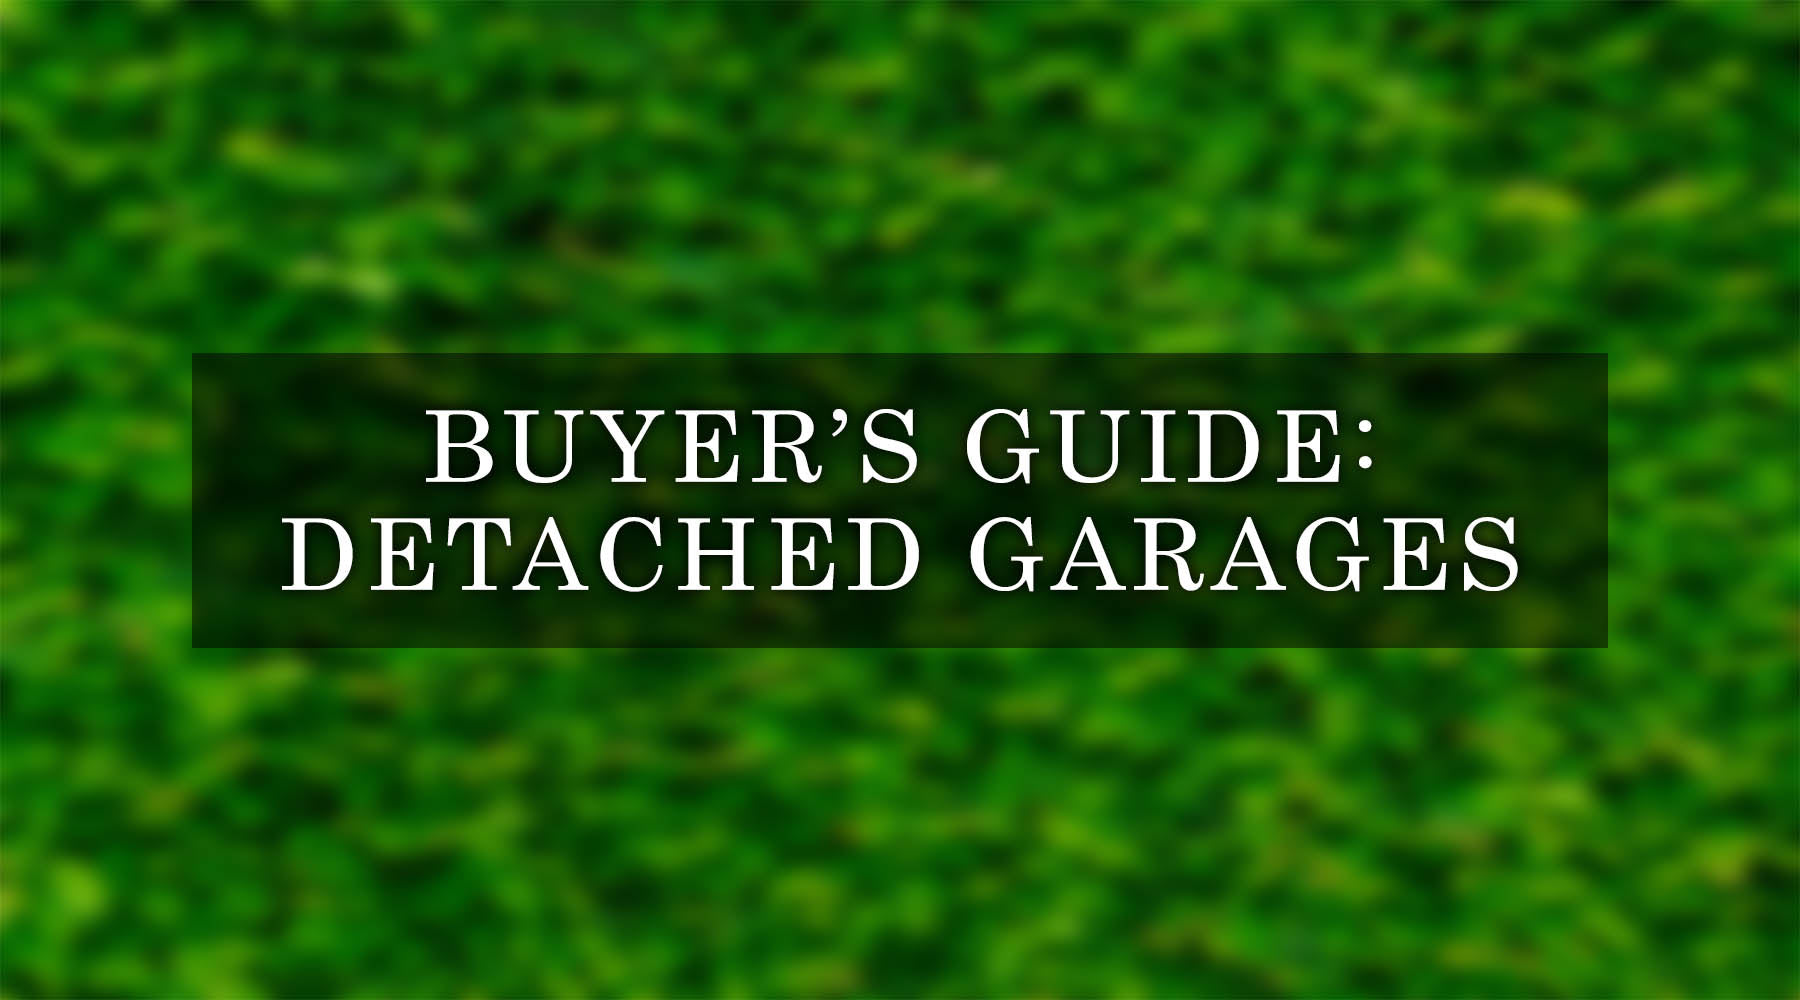 The Complete Guide to Buying a Detached Garage